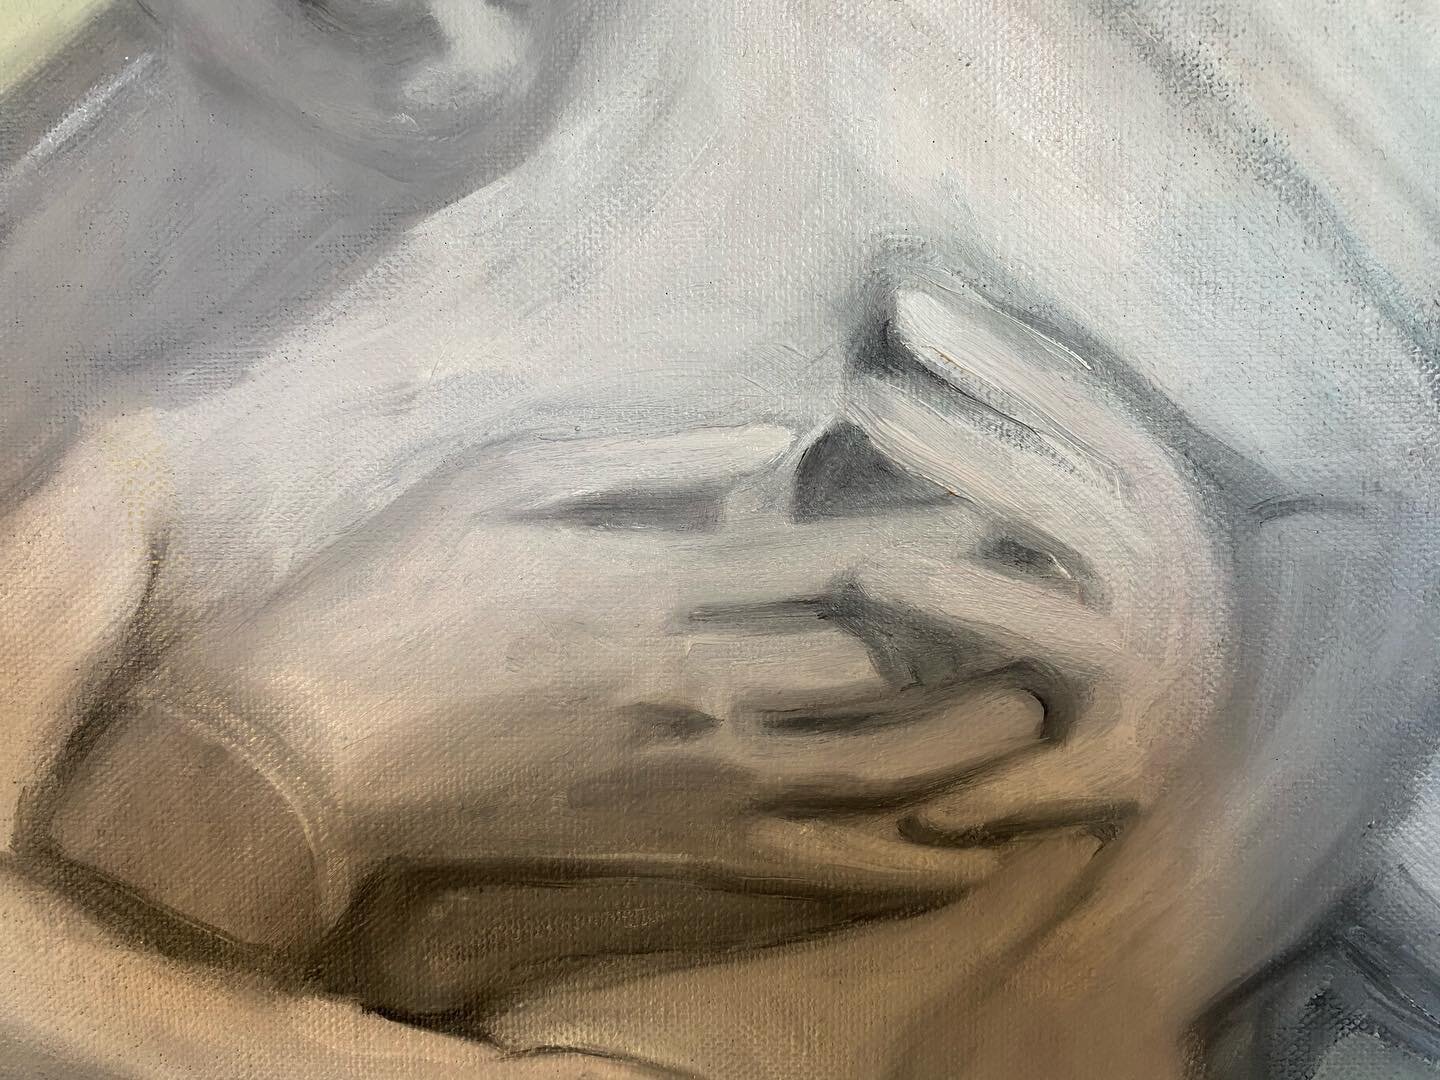 Detail of a painting in progress. A mother holding on, gently but firmly. 

#dpatriciahay #artistsupportpledgeuk #paintpaintpaint #artists_insta #artistsoninsta #paintingoncanvas #canadianpainter #womenartist #womenartistsofinstagram #oilpaintingsonc